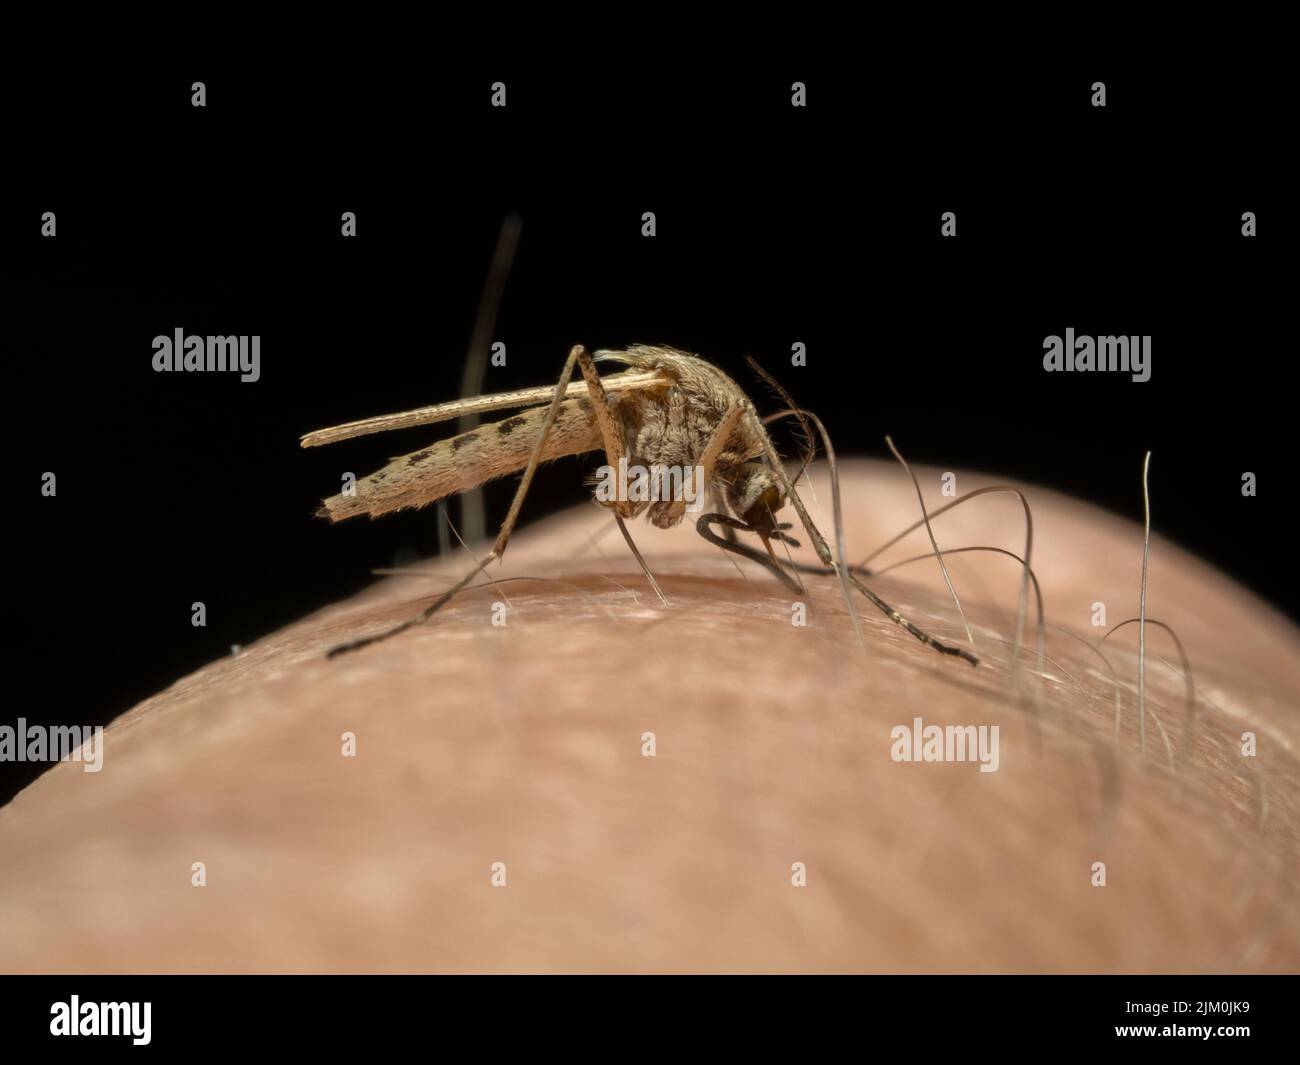 Side view of a female coastal mosquito, Aedes dorsalis, with its proboscis inserted deeply into the skin of a man's finger, preparing to suck blood Stock Photo